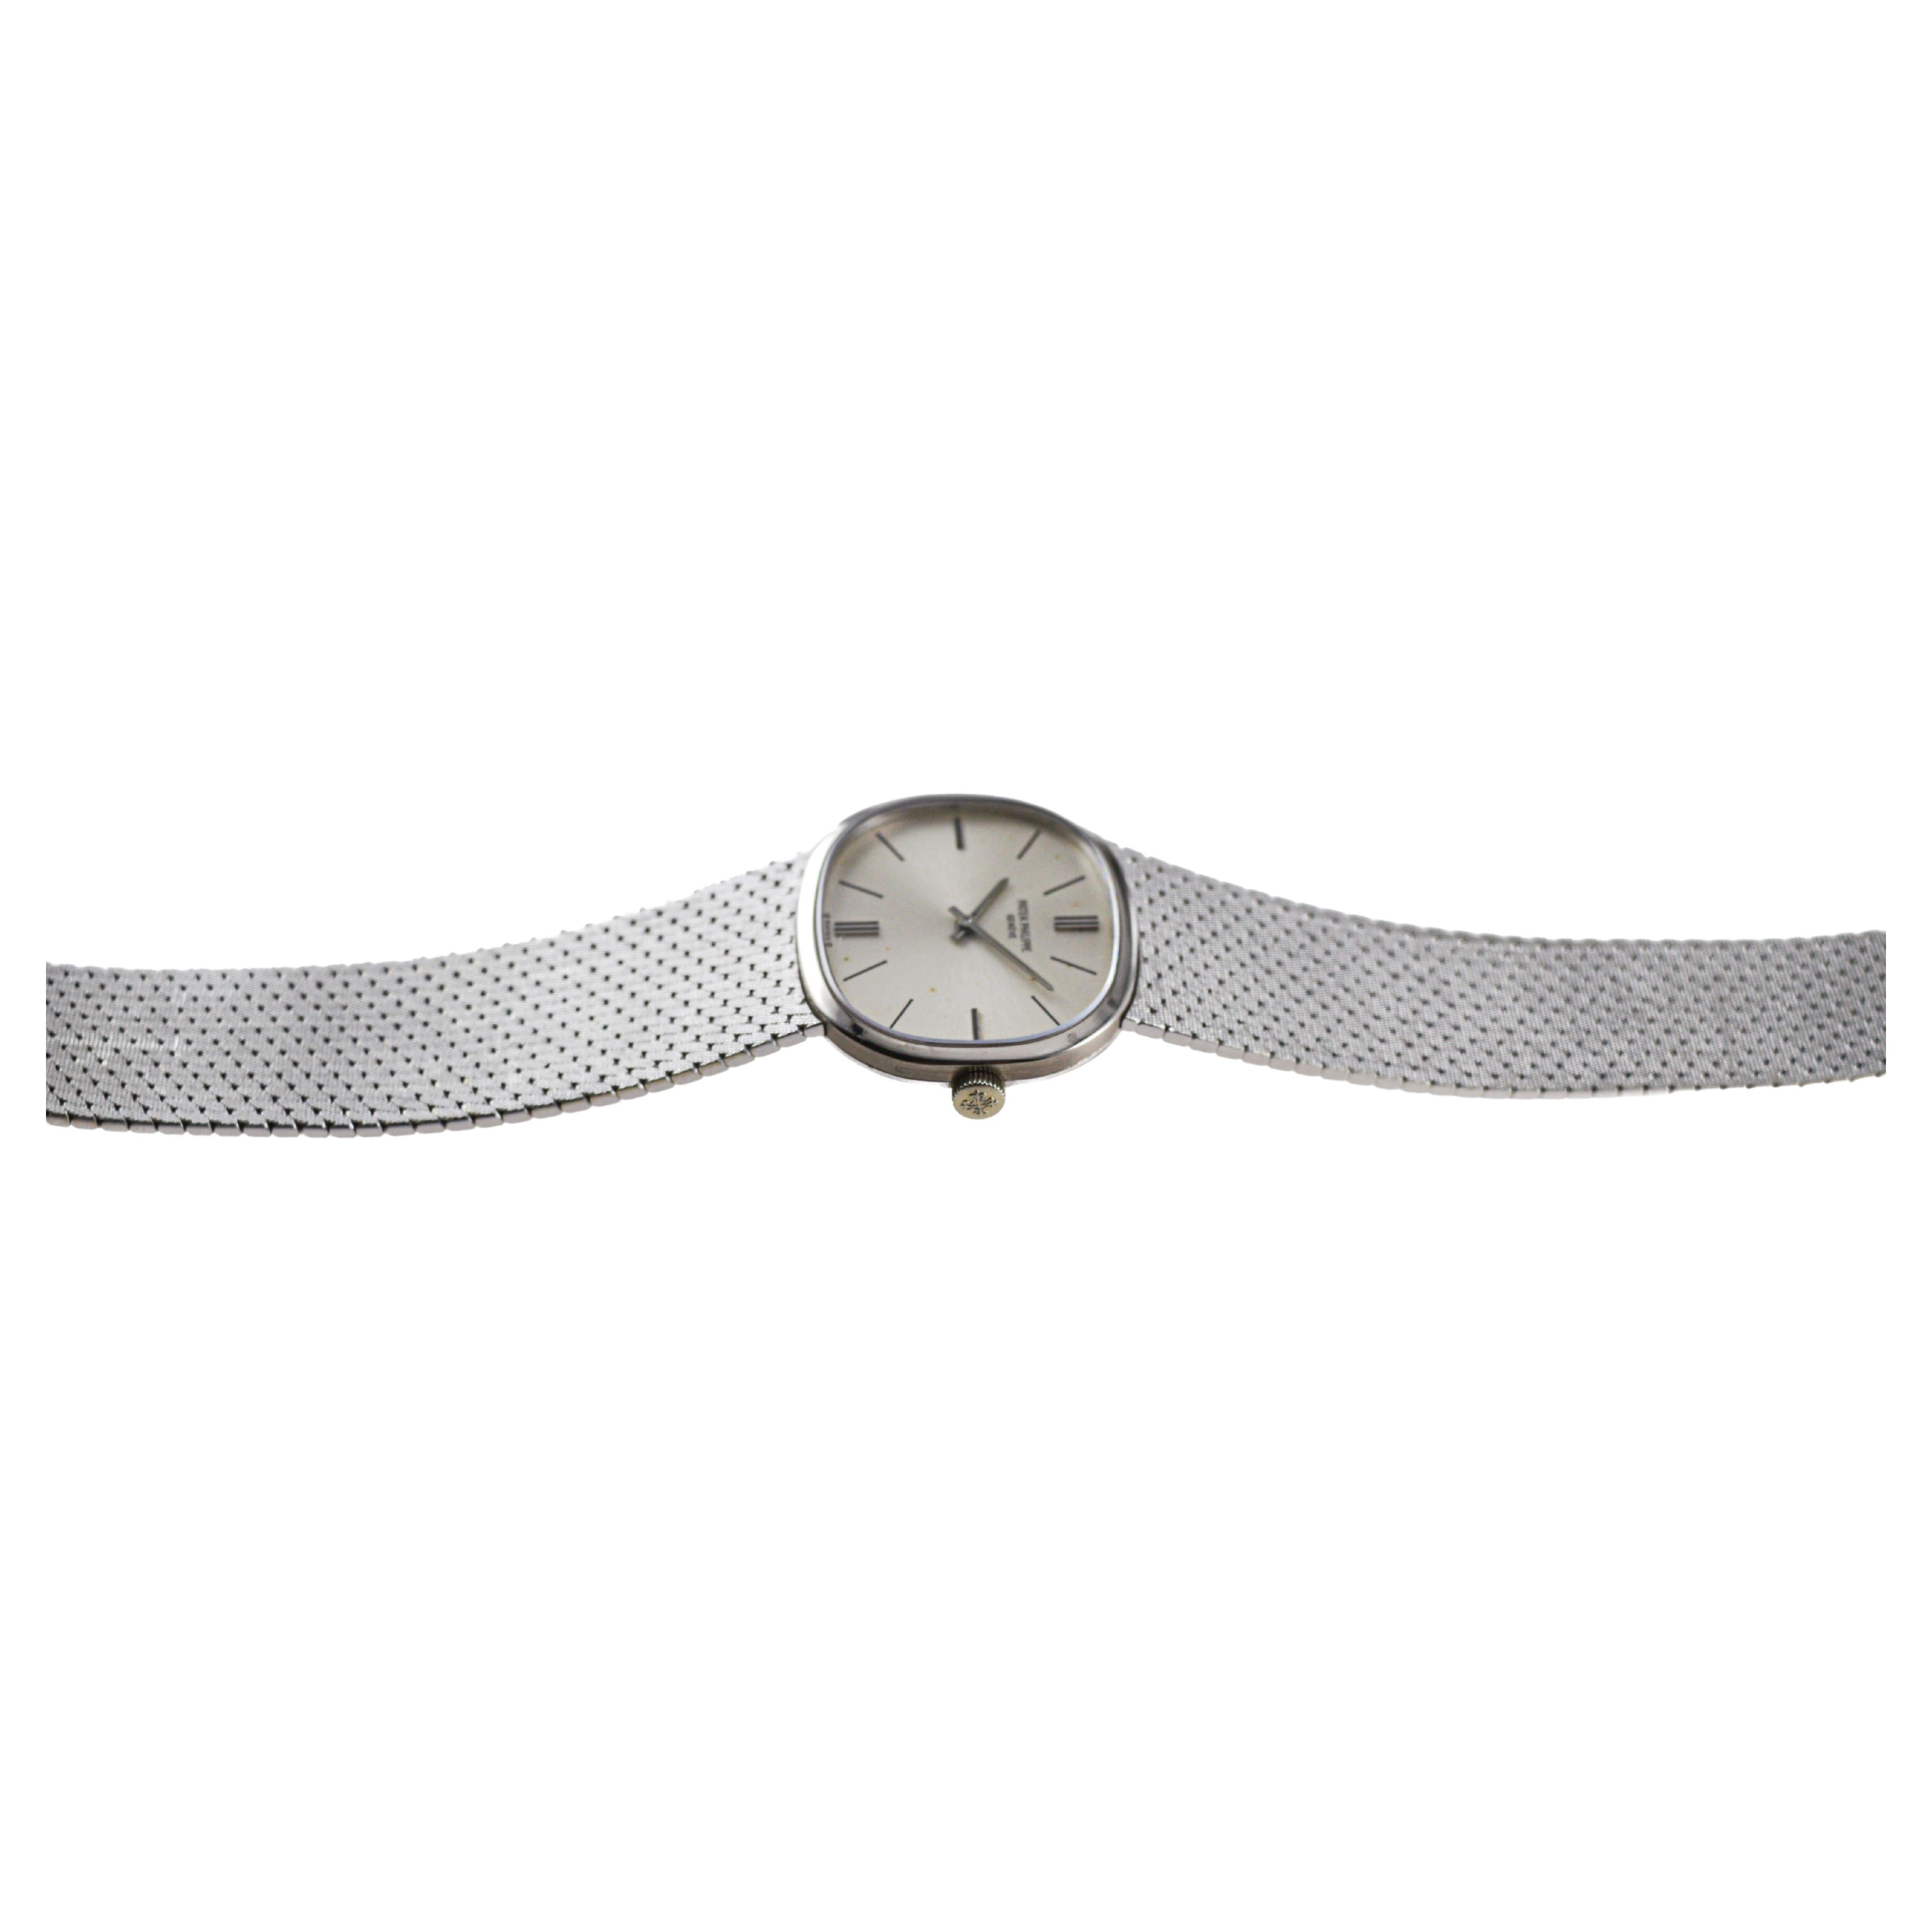 Patek Philippe 18 Karat White Gold Bracelet Watch from 1971 with Factory Archive 1